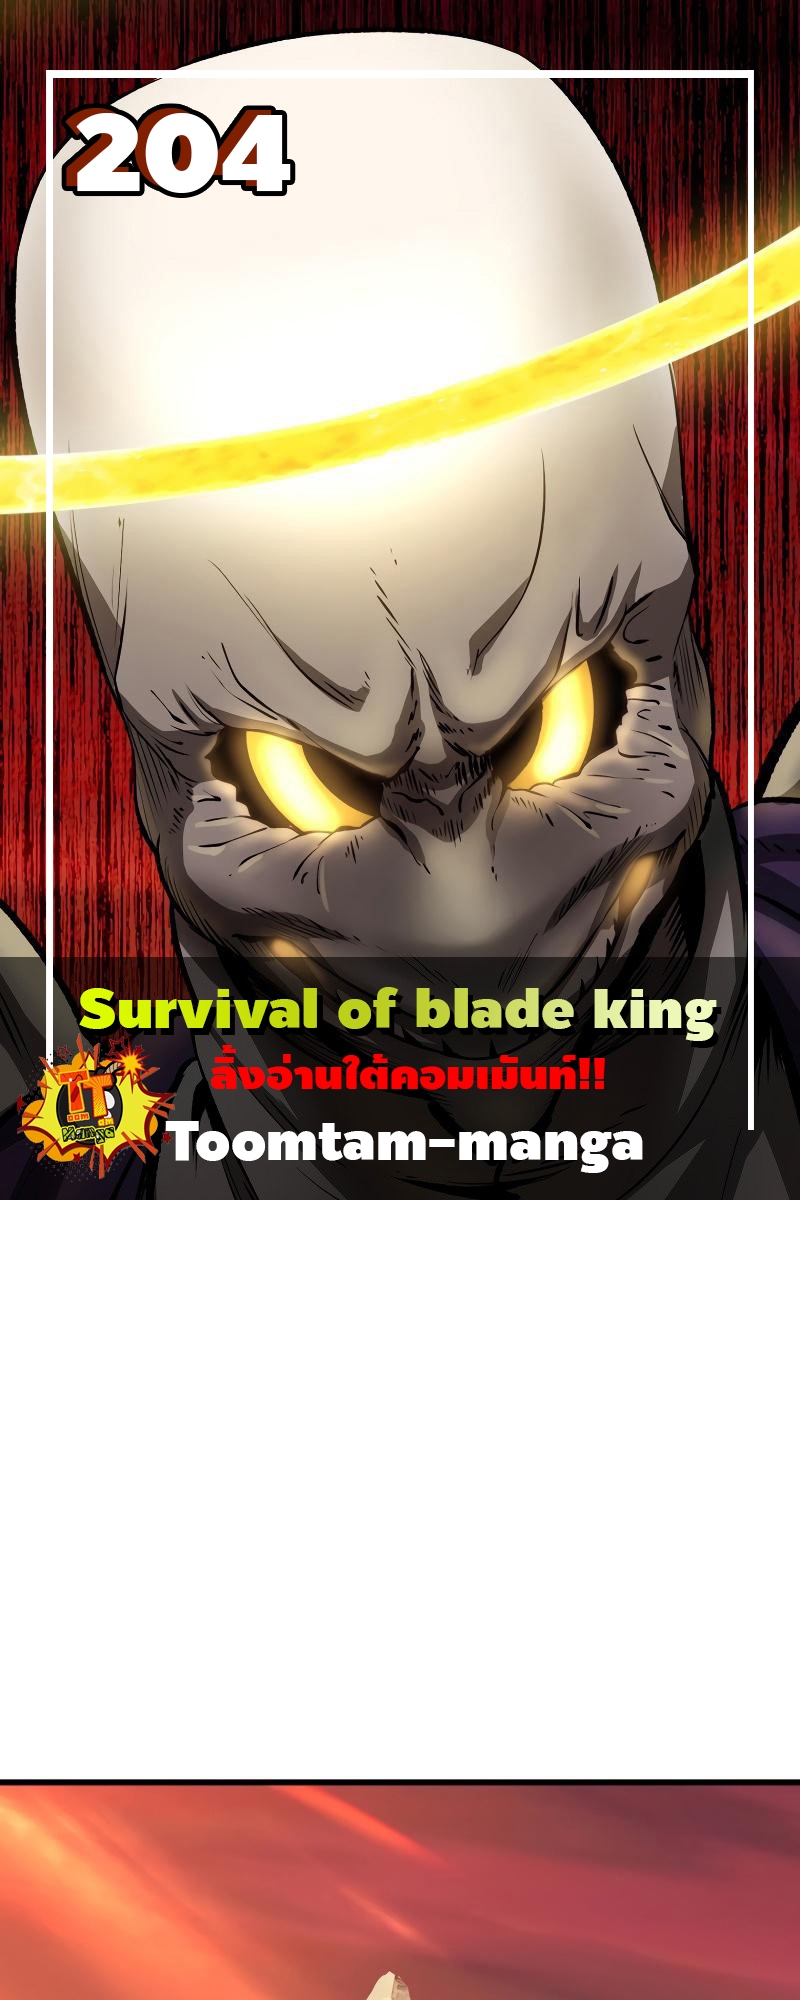 Survival of blade king 204 4 05 25670001